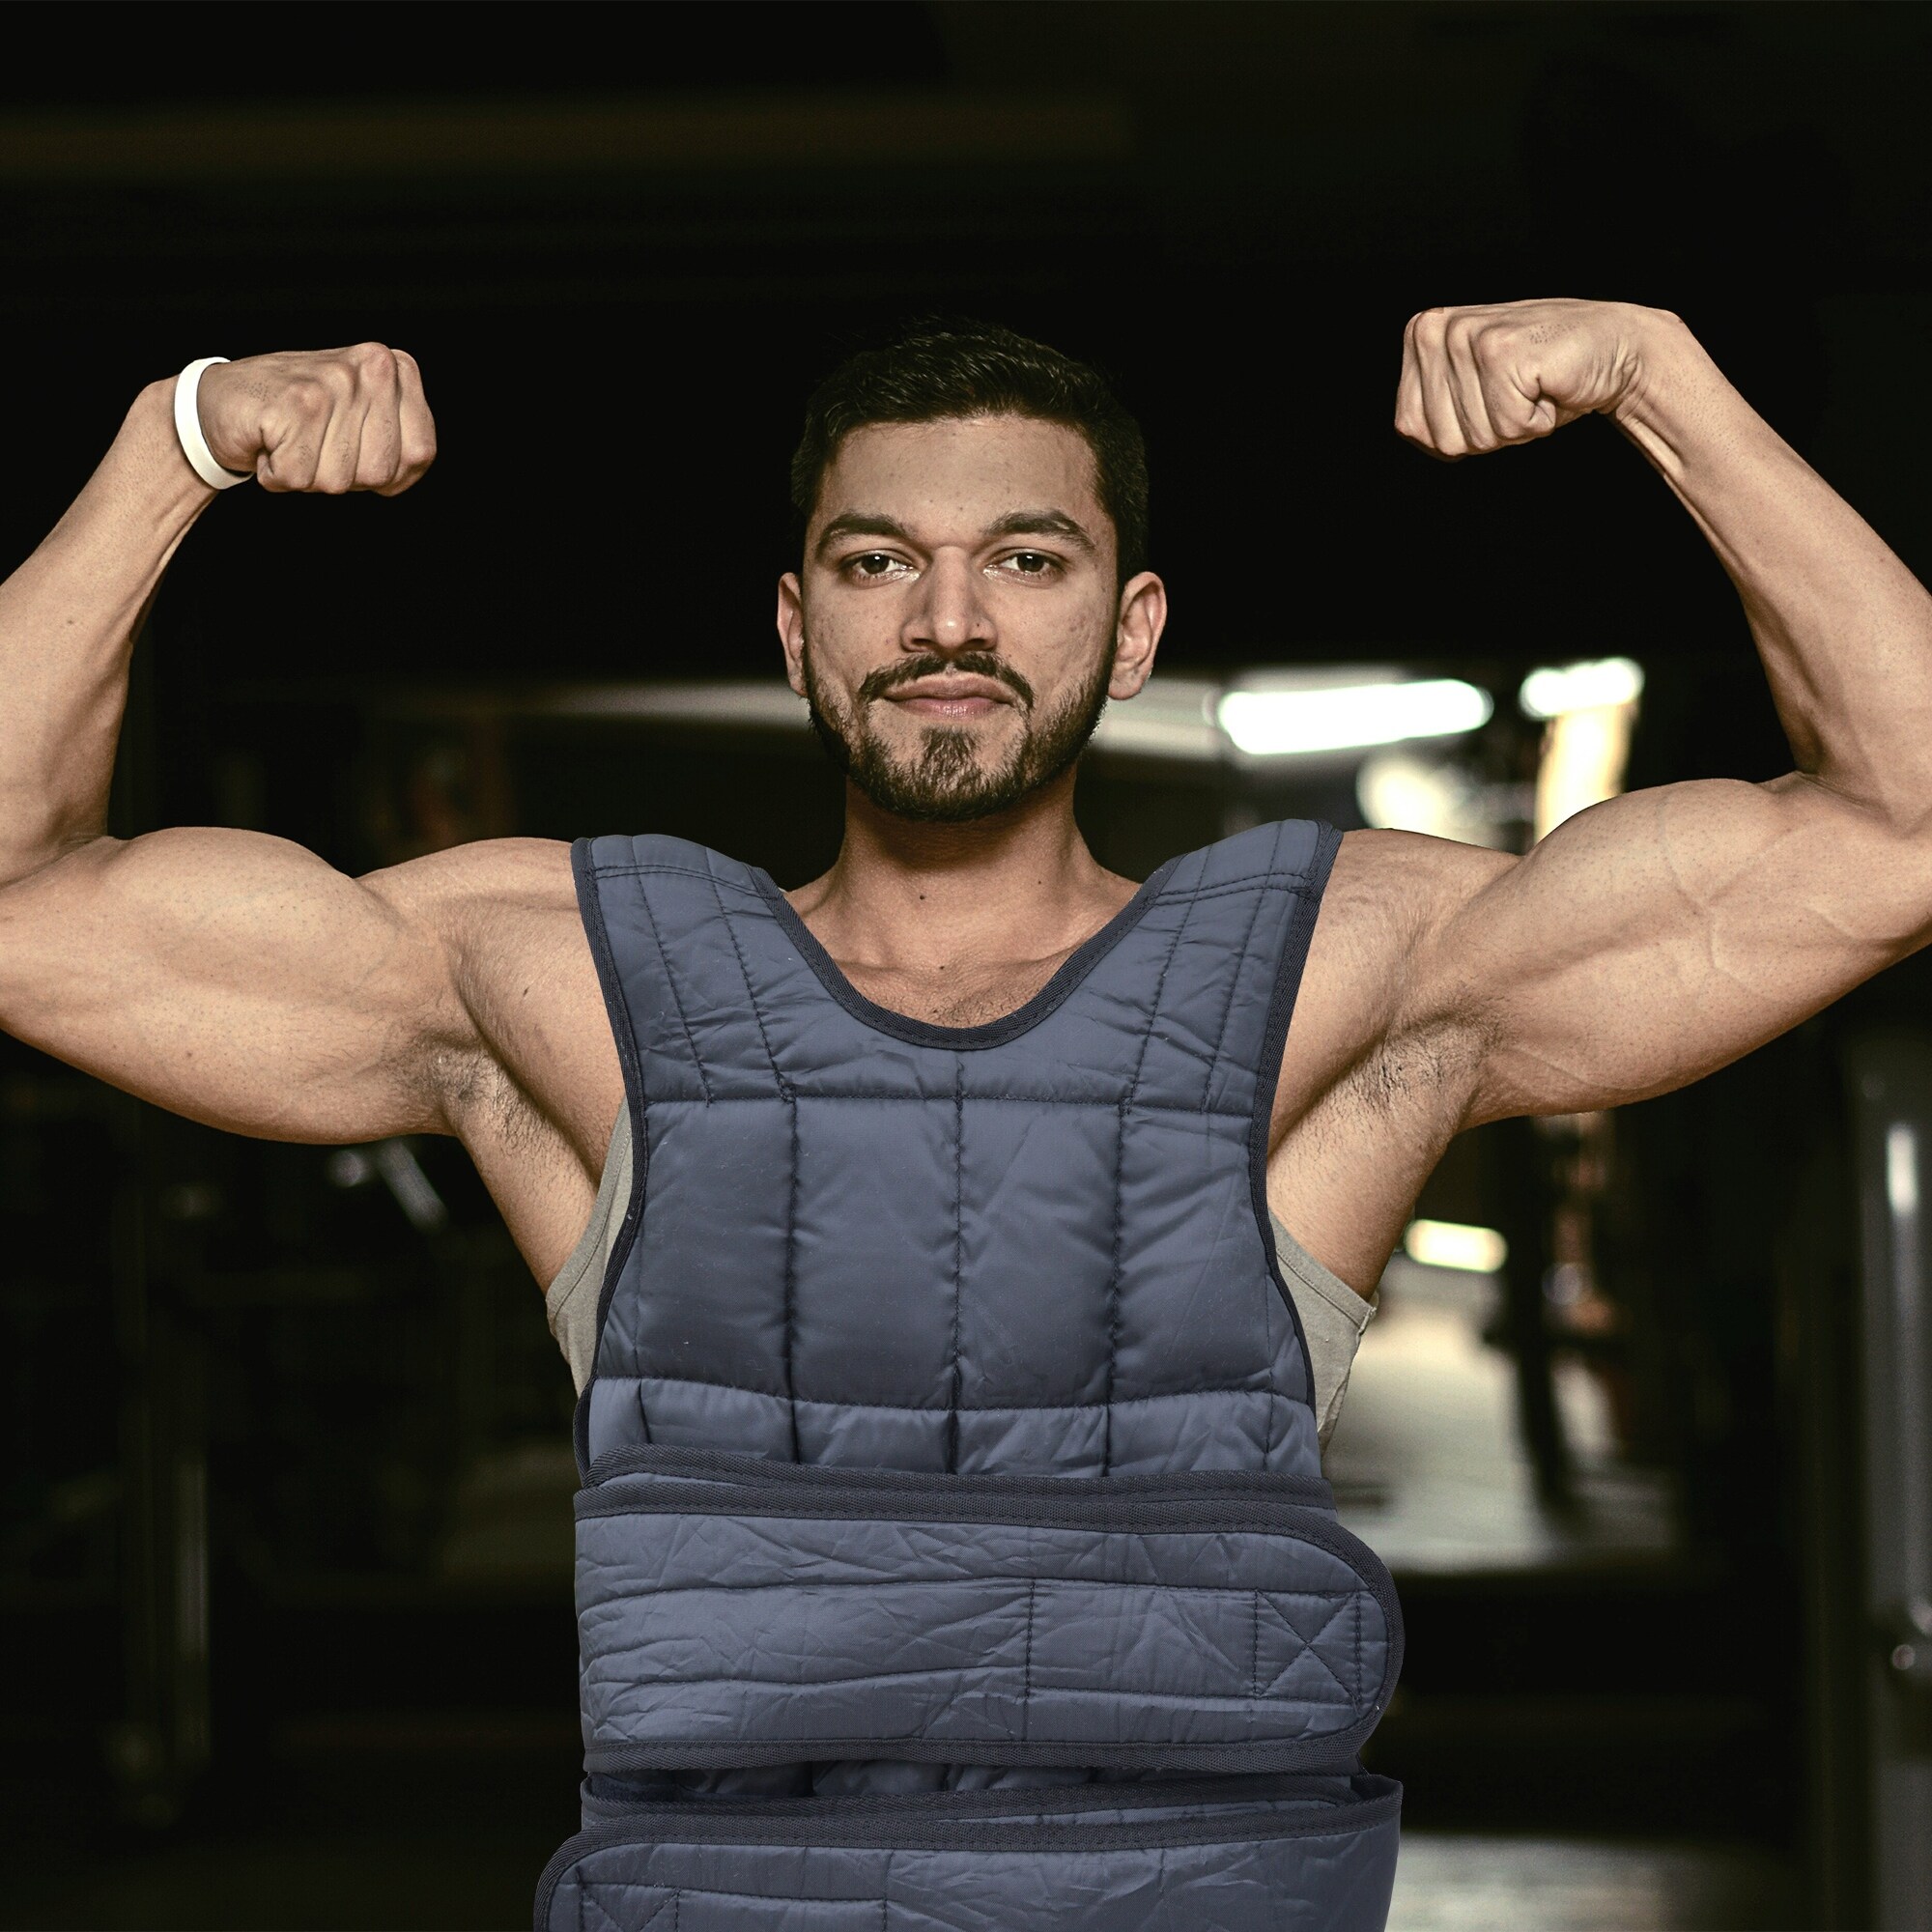 https://ak1.ostkcdn.com/images/products/is/images/direct/06e4ae9334c244f1dd21d30c12facc0dc03c864e/BLACK-ONLY-Weighted-Vest%2C-Body-Weight-Sandbag-for-Cardio-Workout-Fitness-Training.jpg